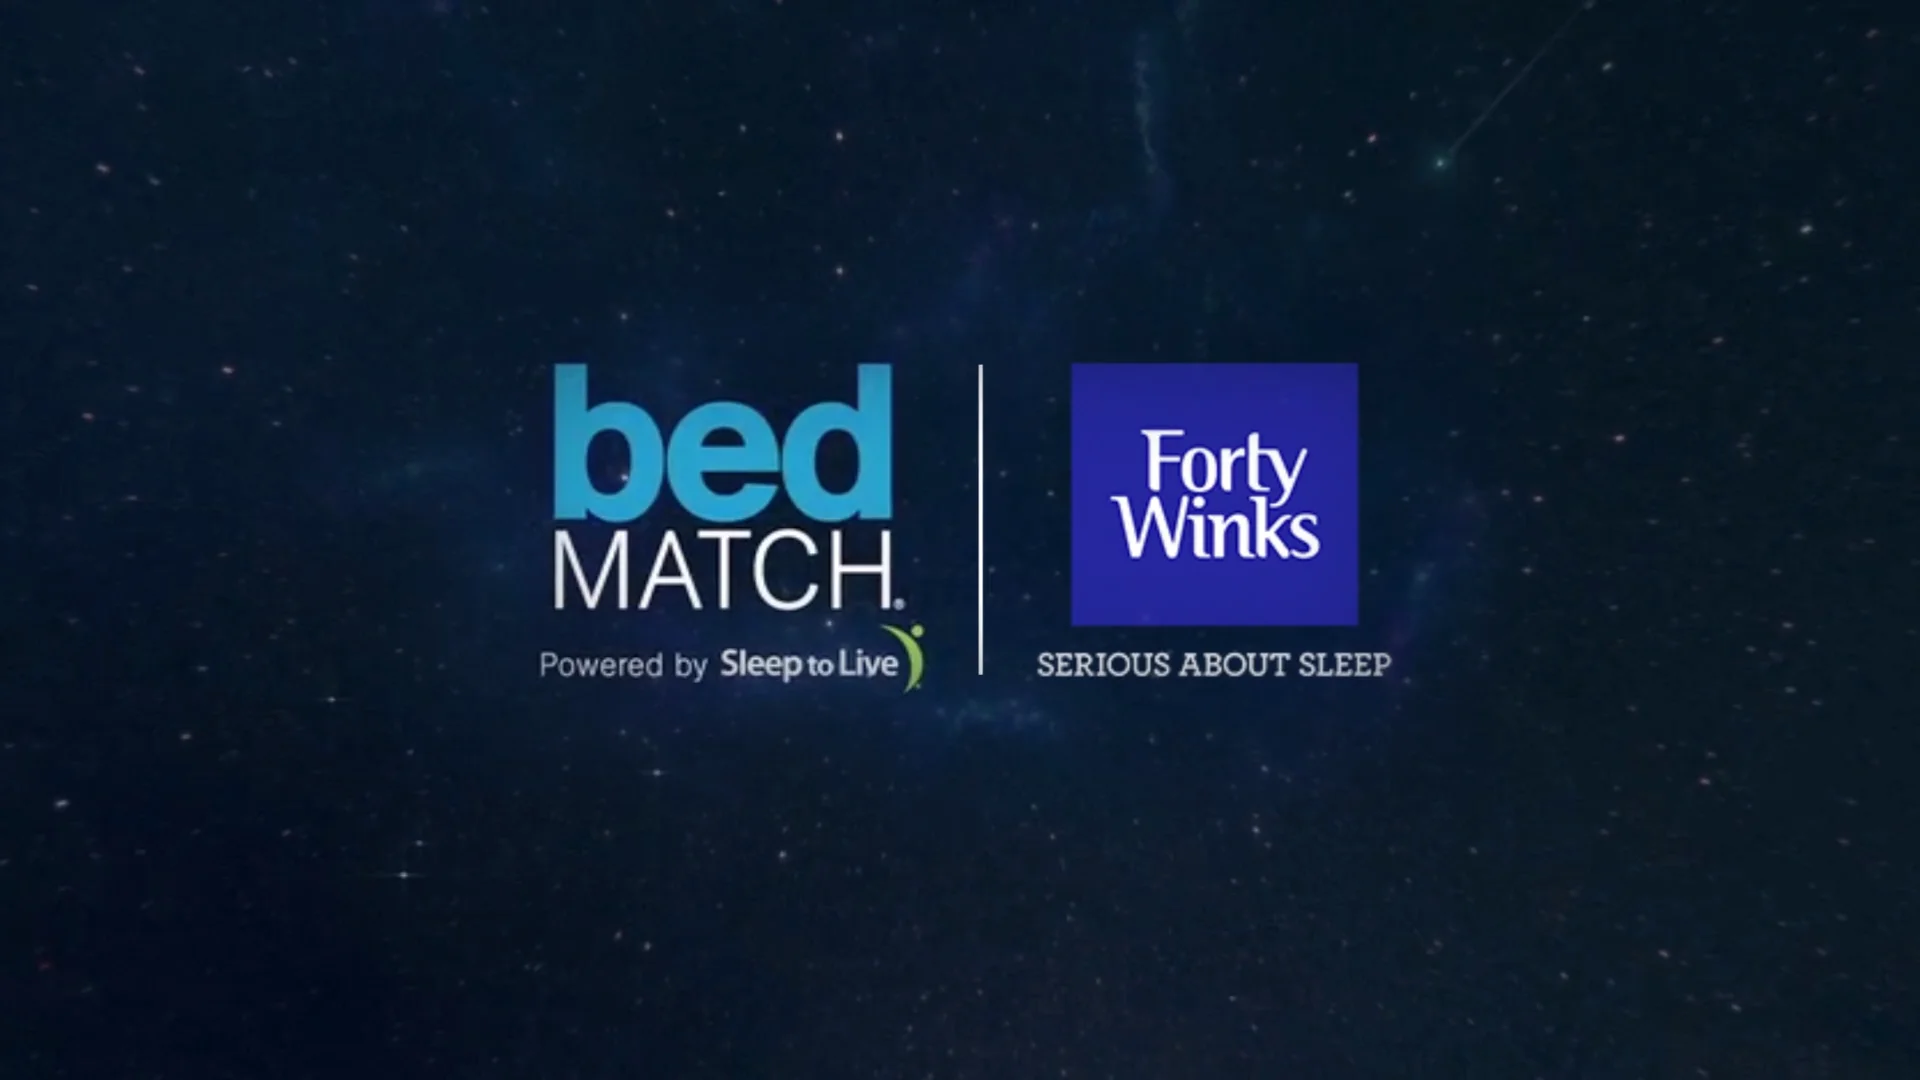 Forty Winks - Bed Match : Explainer on Vimeo